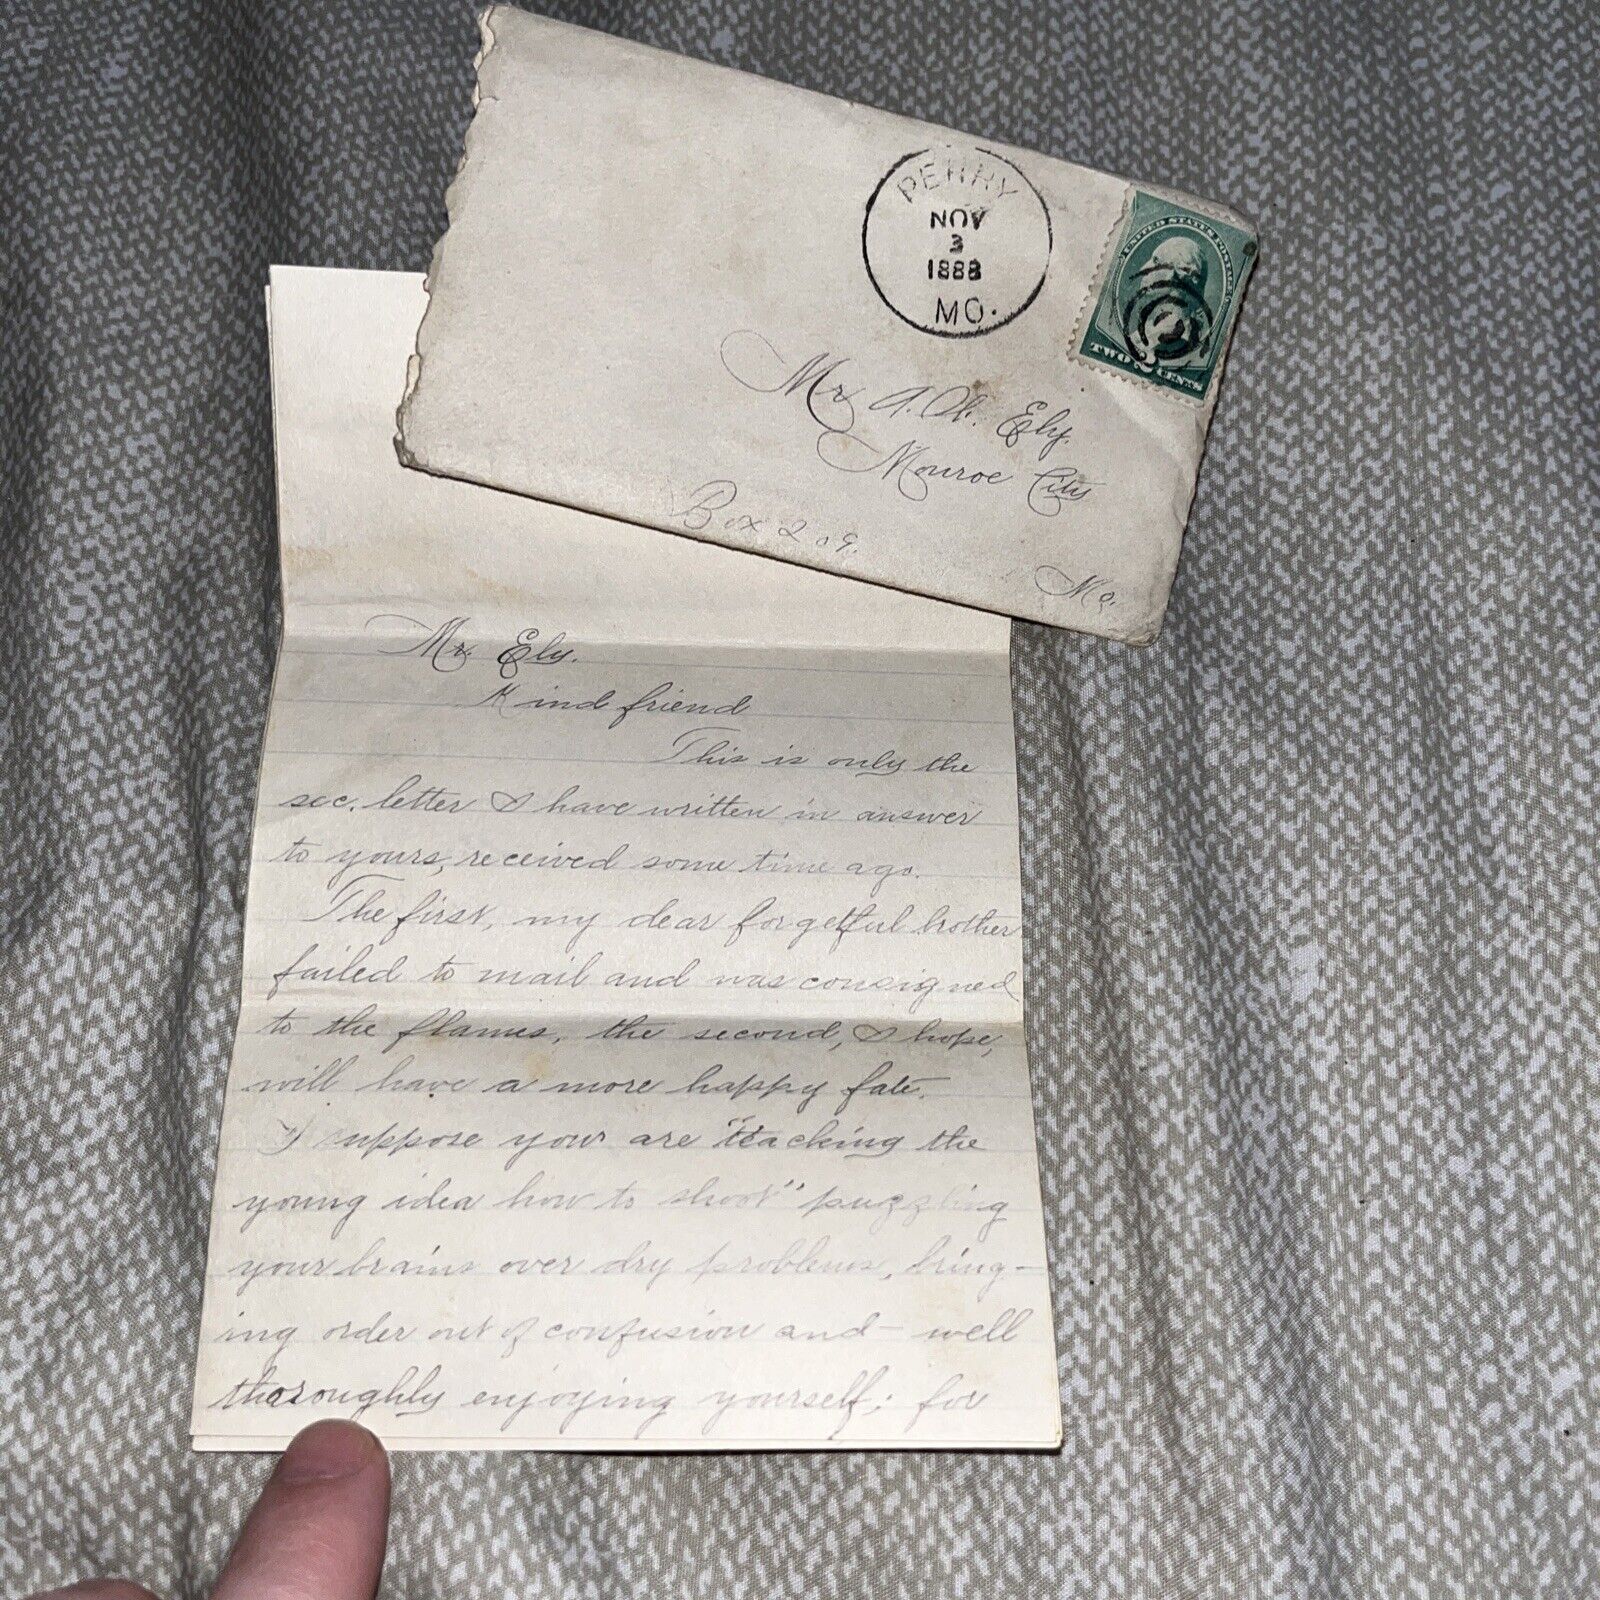 Antique 1888 Letter: Perry MO to Monroe City: Written by “Disagreeable” Woman